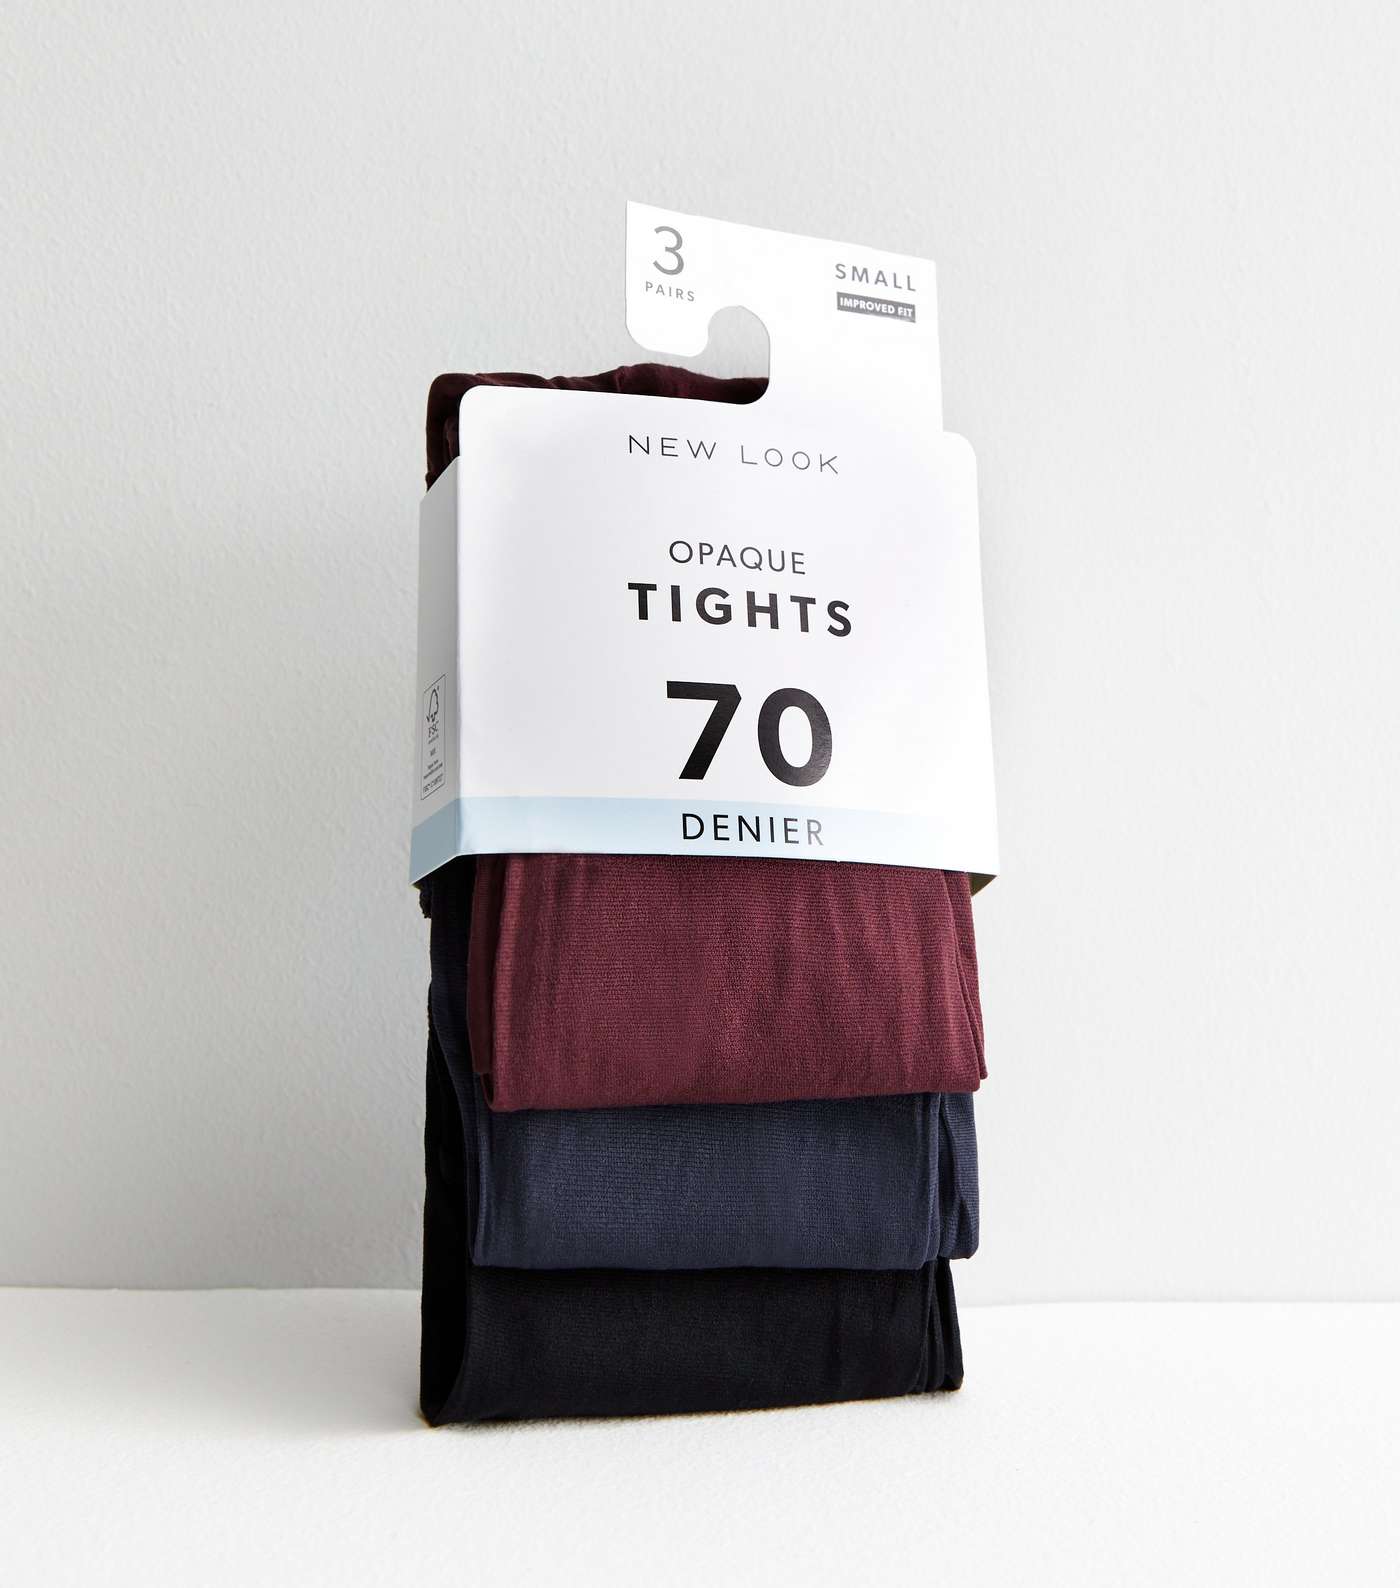 3 Pack Dark Red Black and Grey 70 Denier Opaque Tights